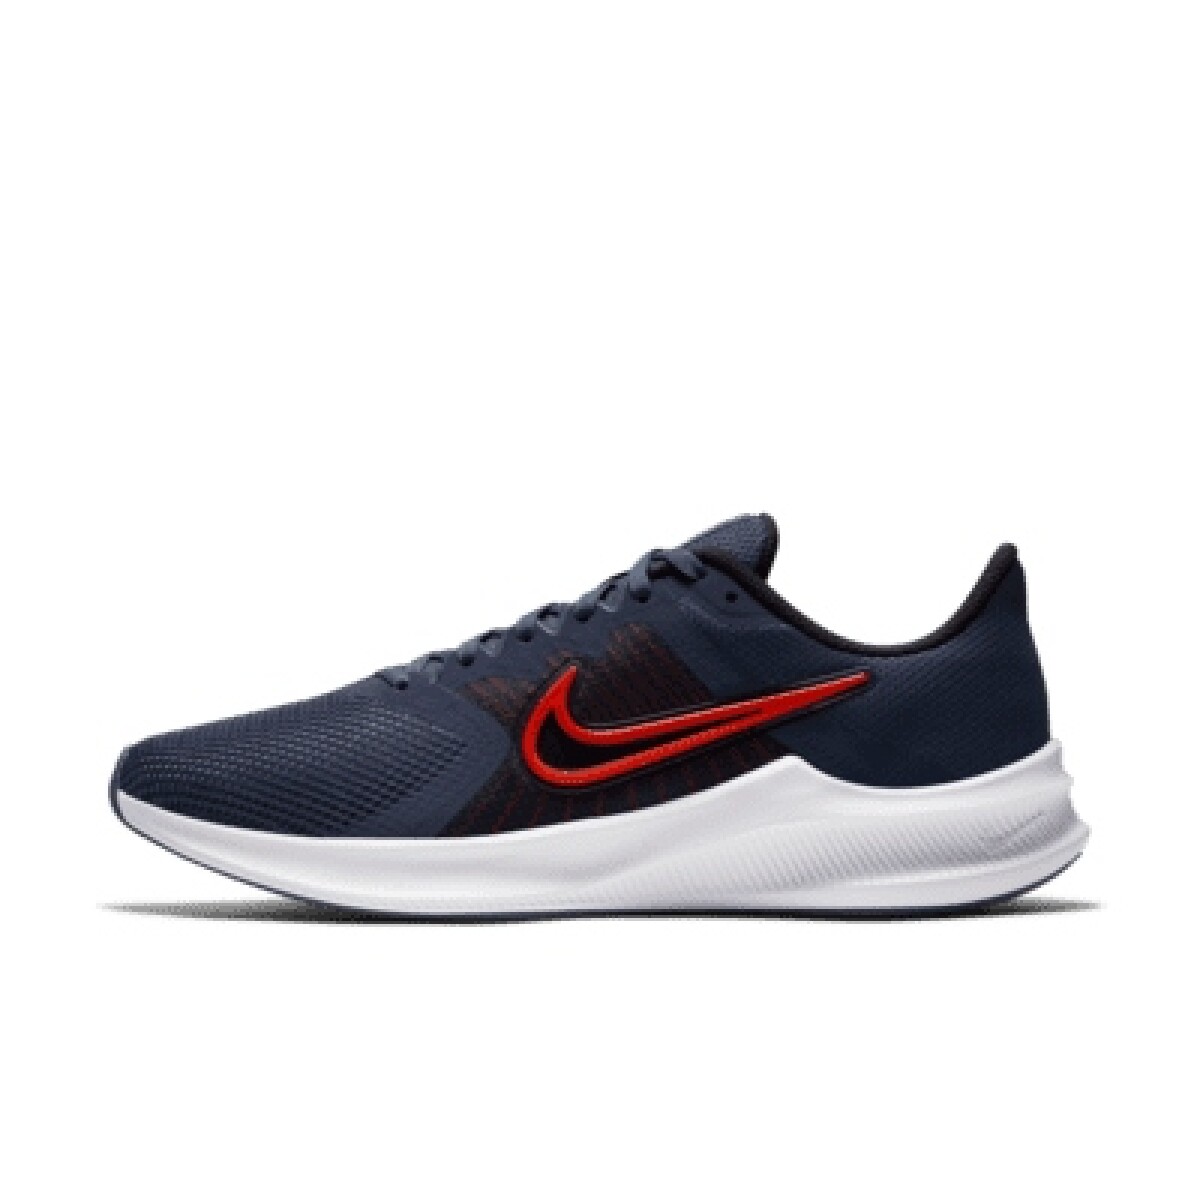 Champion Nike Running Hombre Downshifter 11 T - Color Único 